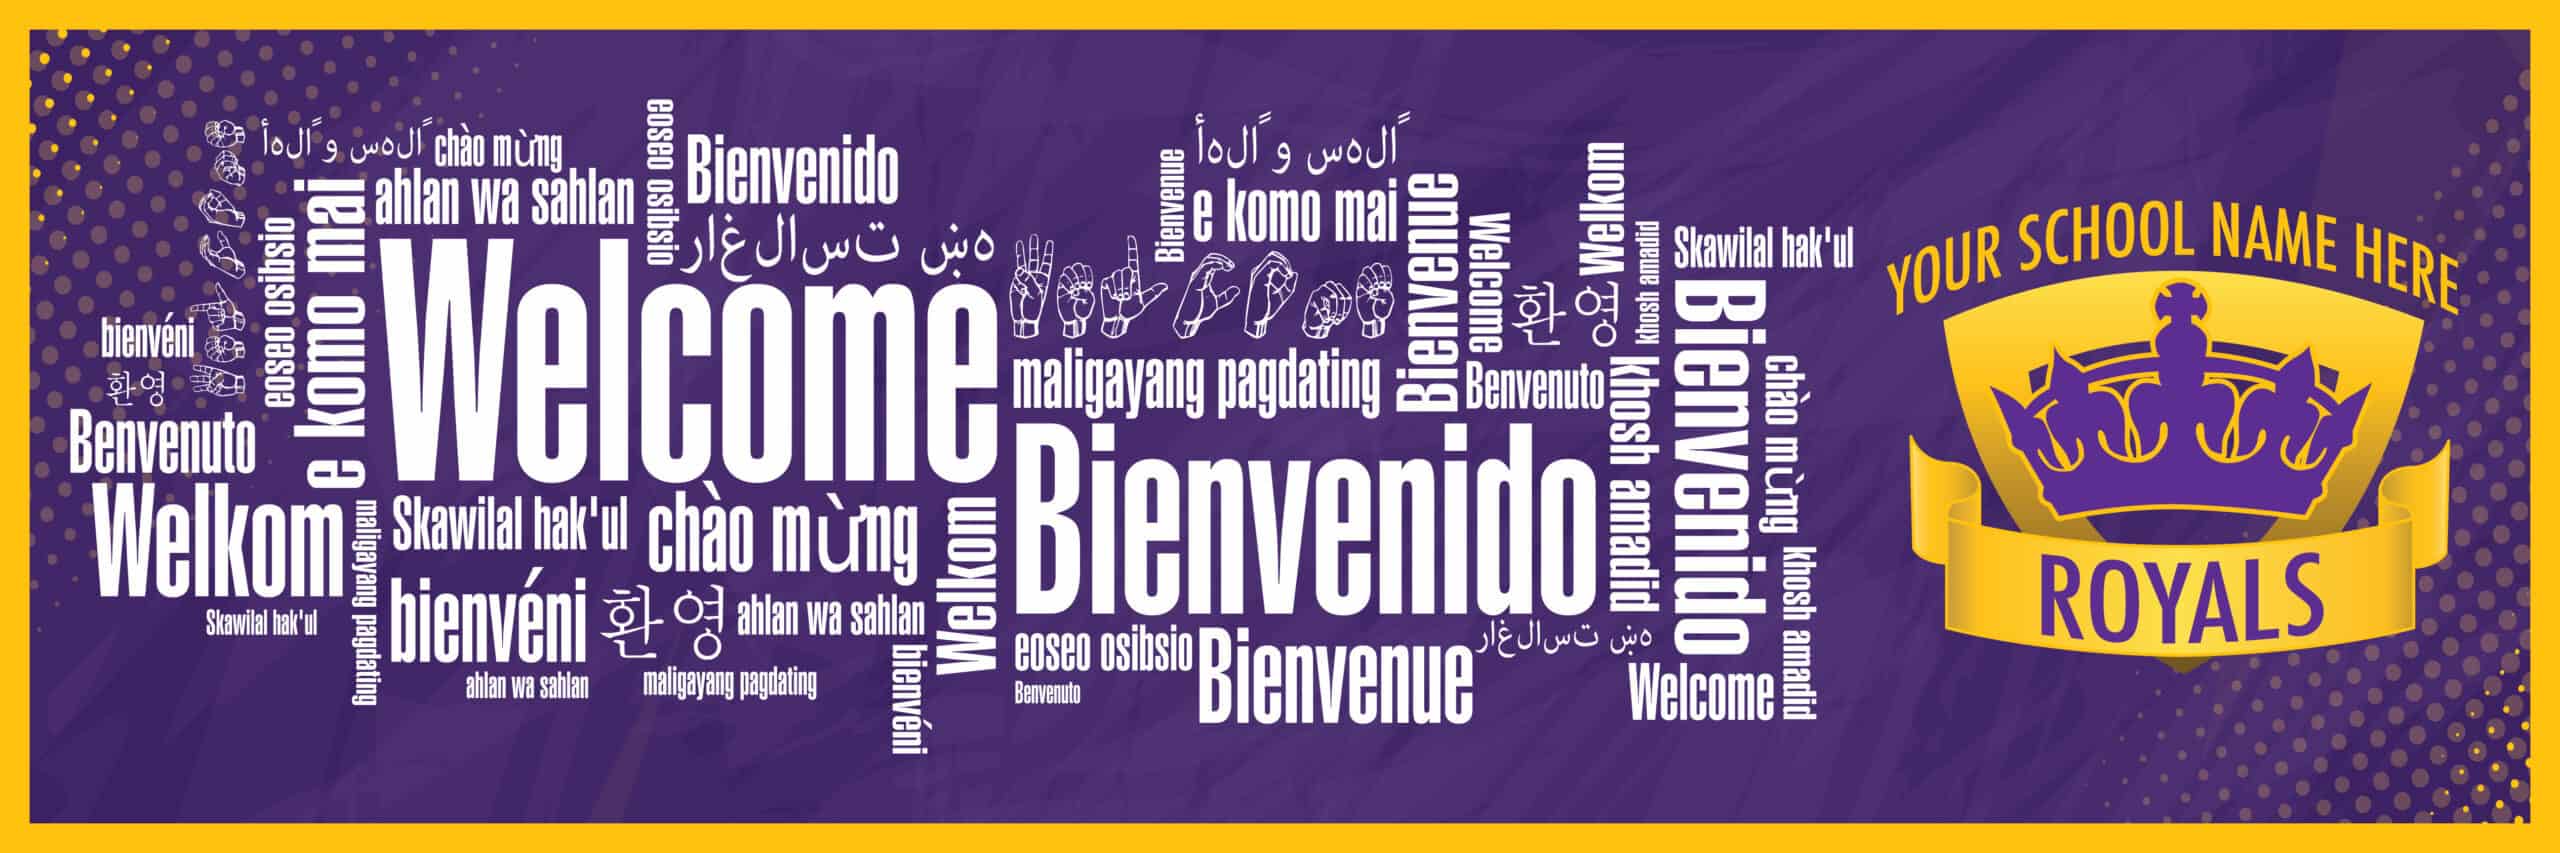 welcome-inclusive-banner-royal